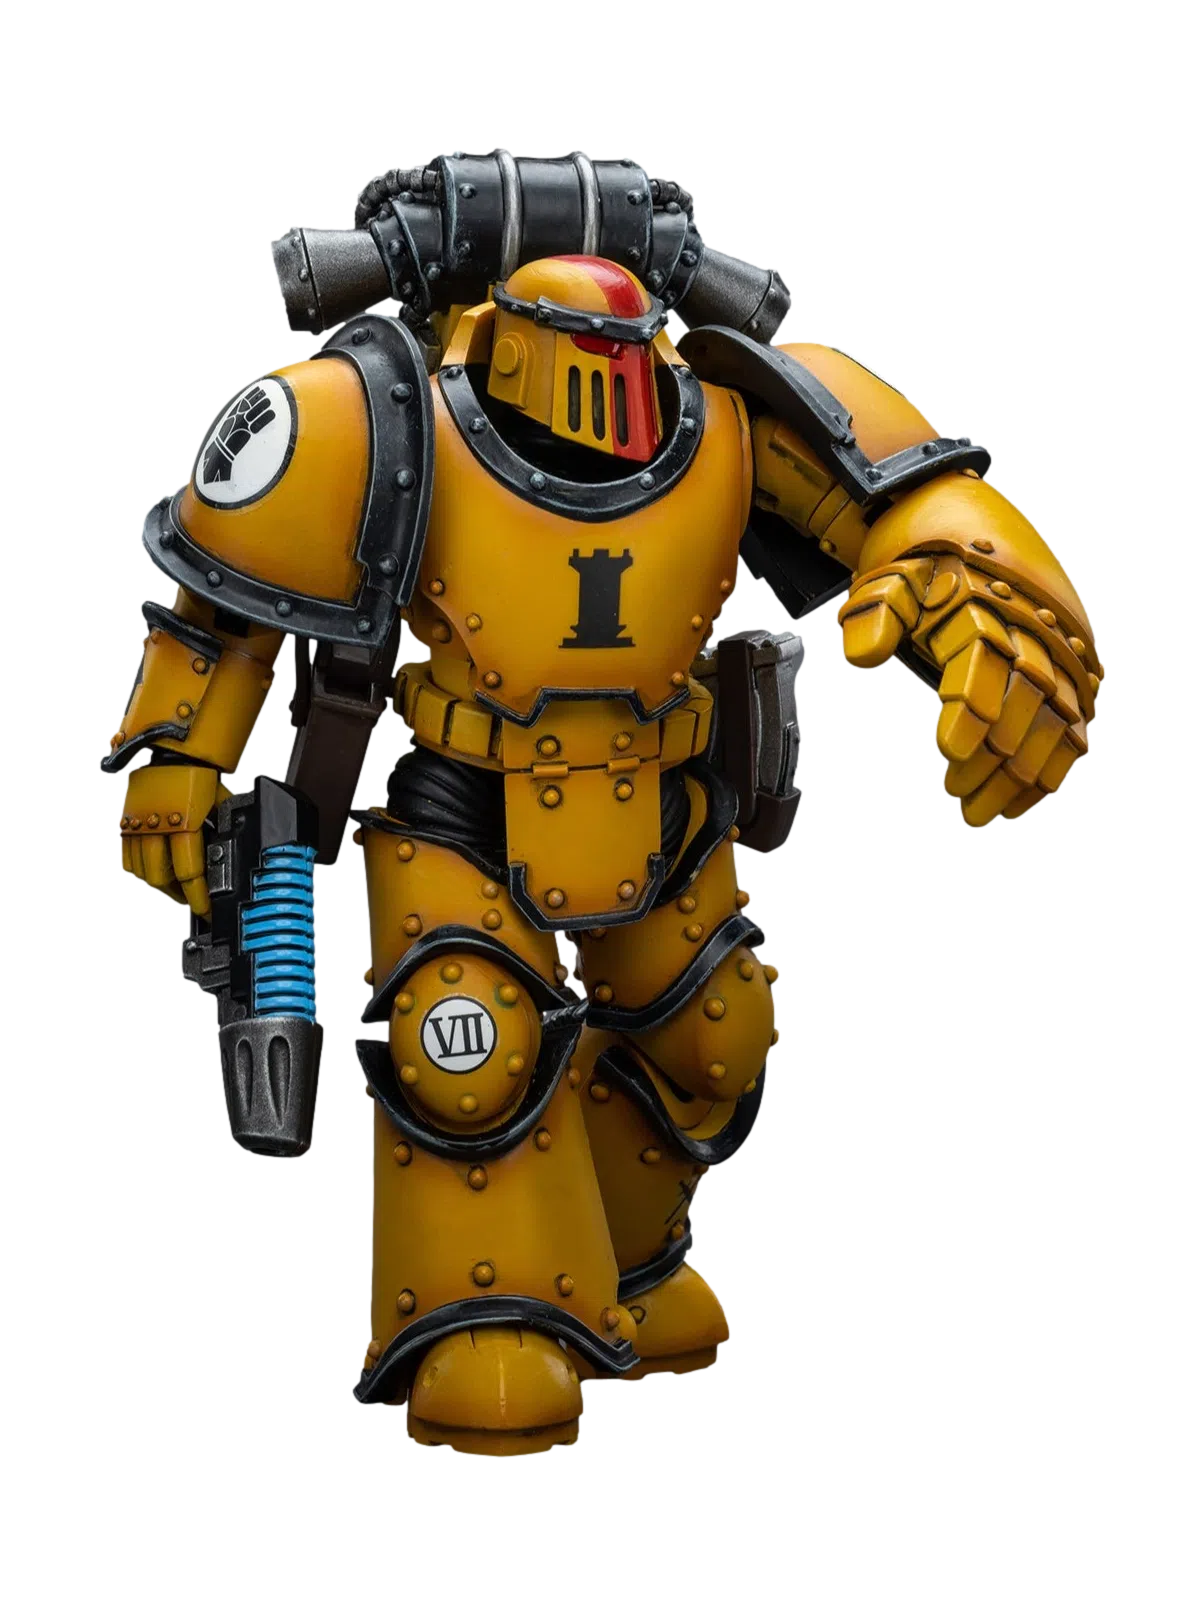 Warhammer: The Horus Hersey: Imperial Fists:Legion MkIII Tactical Squad Sergeant with Power Fist: Joy Toy